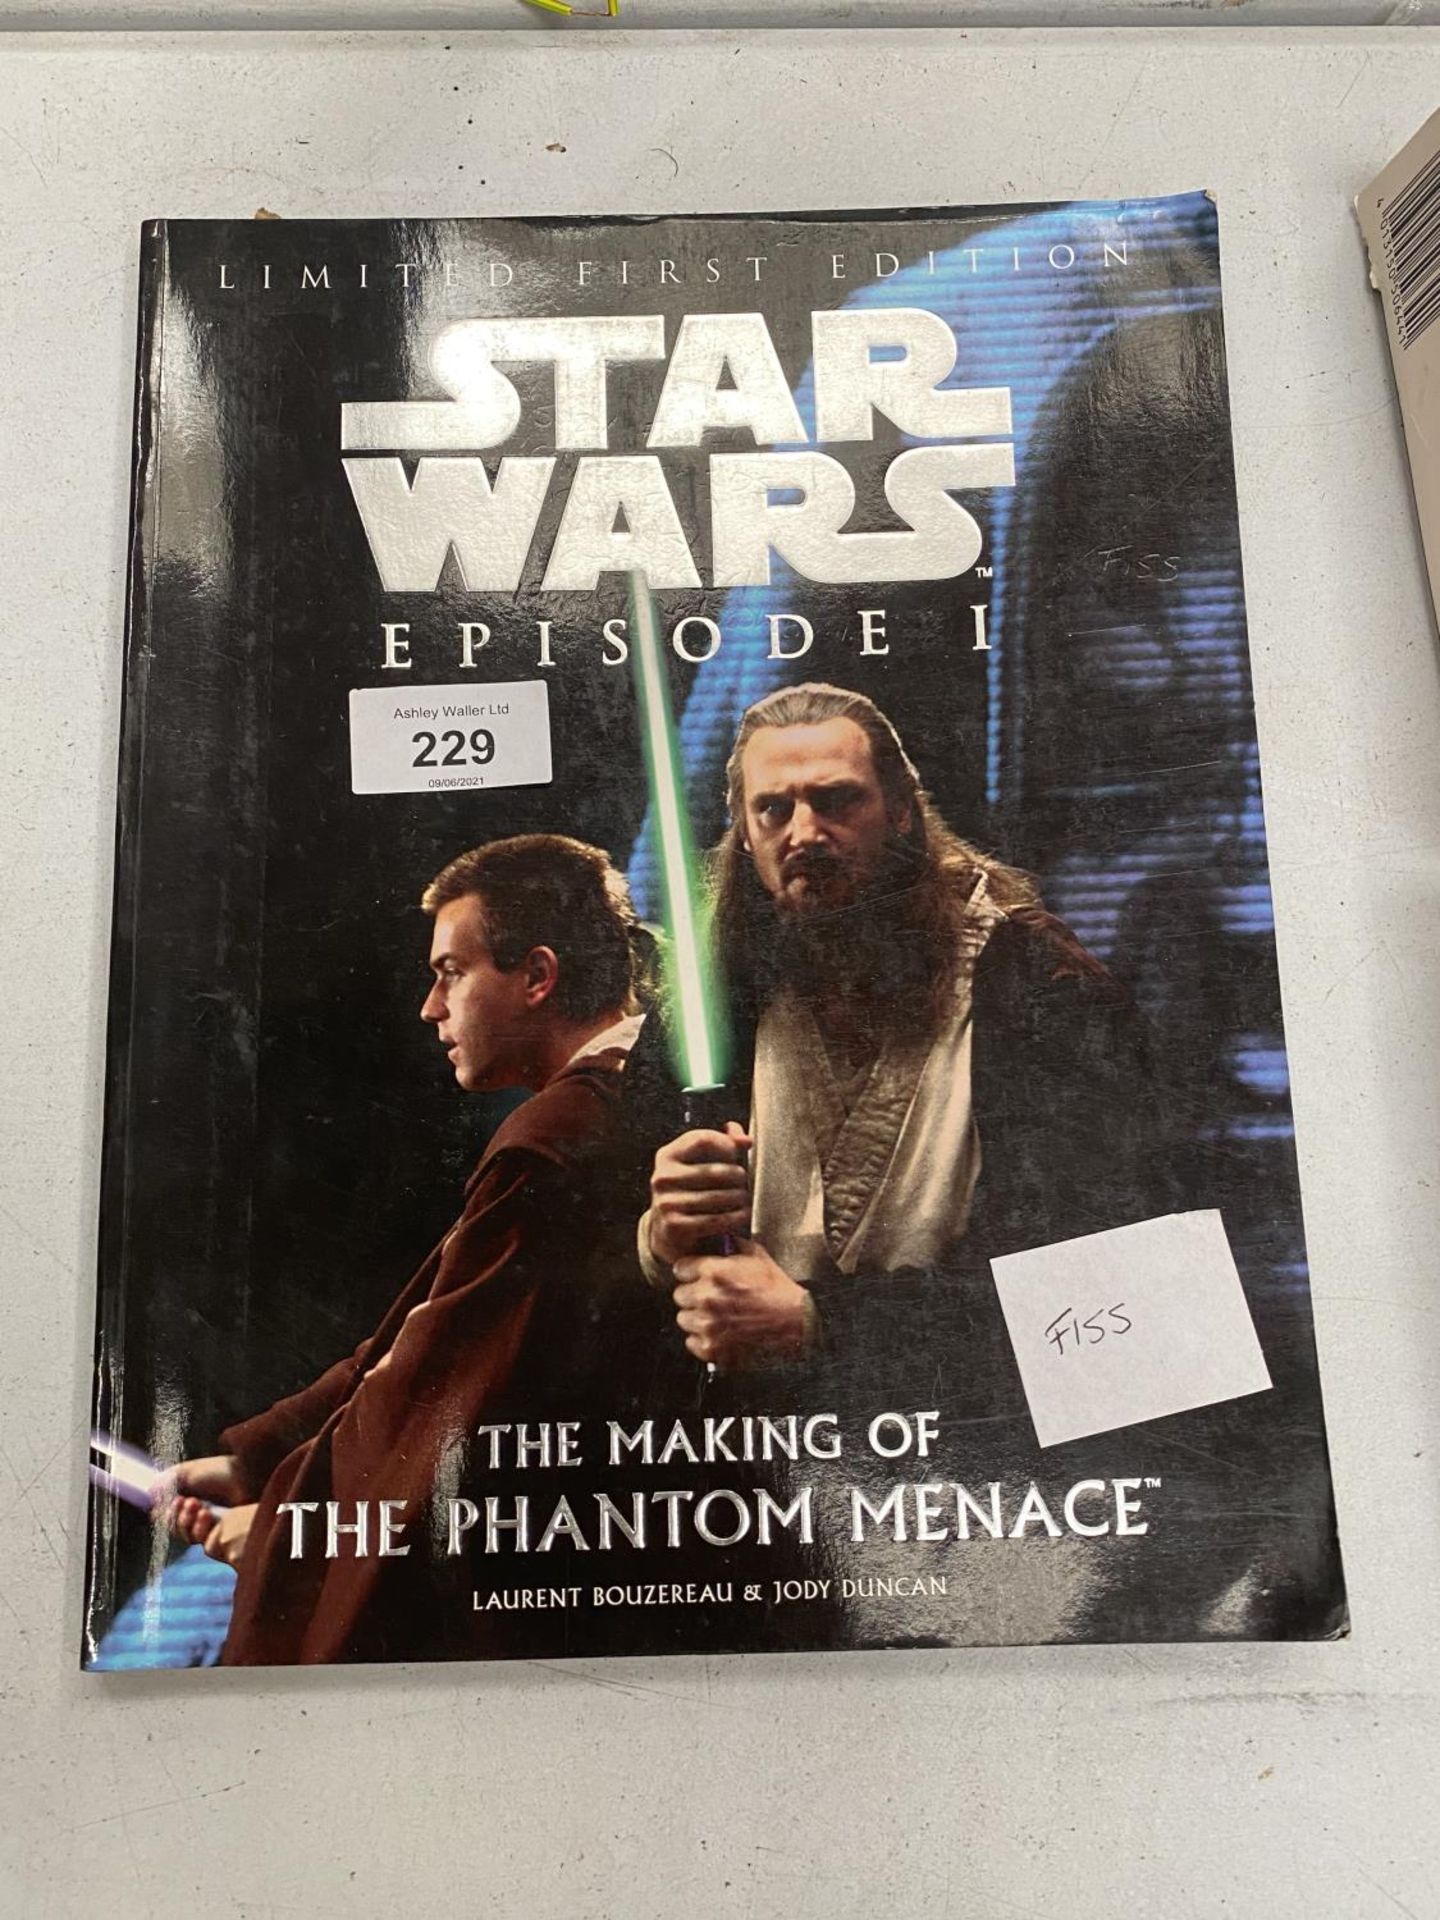 A STAR WARS BOOK 'THE MAKING OF THE PHANTOM MENACE'